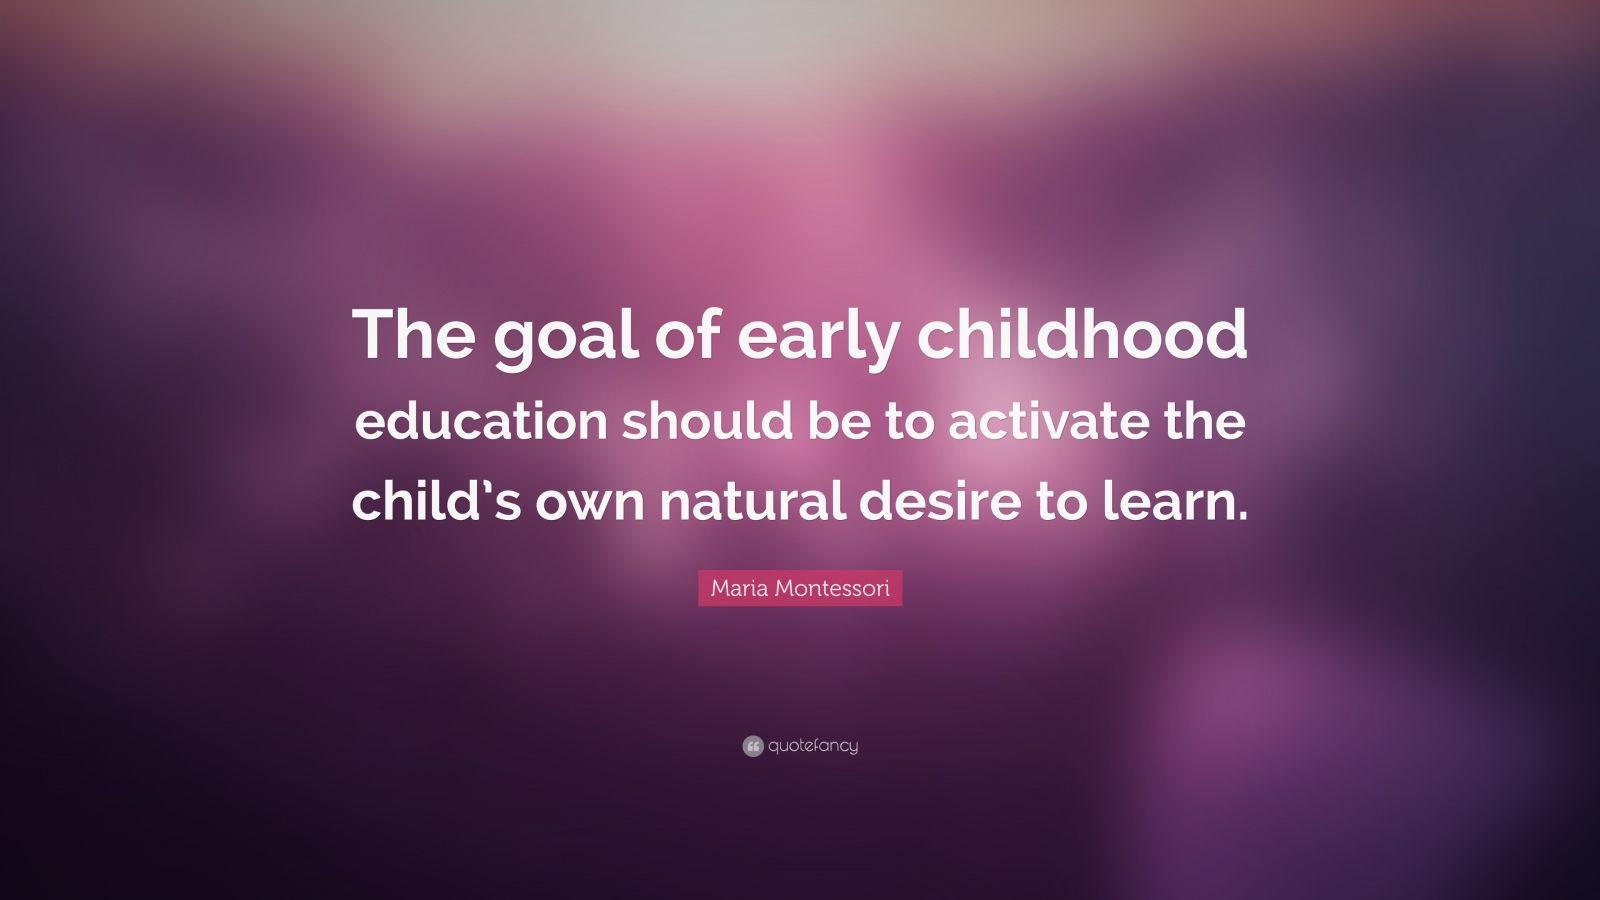 Quotes About Early Childhood Education
 Maria Montessori Quote “The goal of early childhood